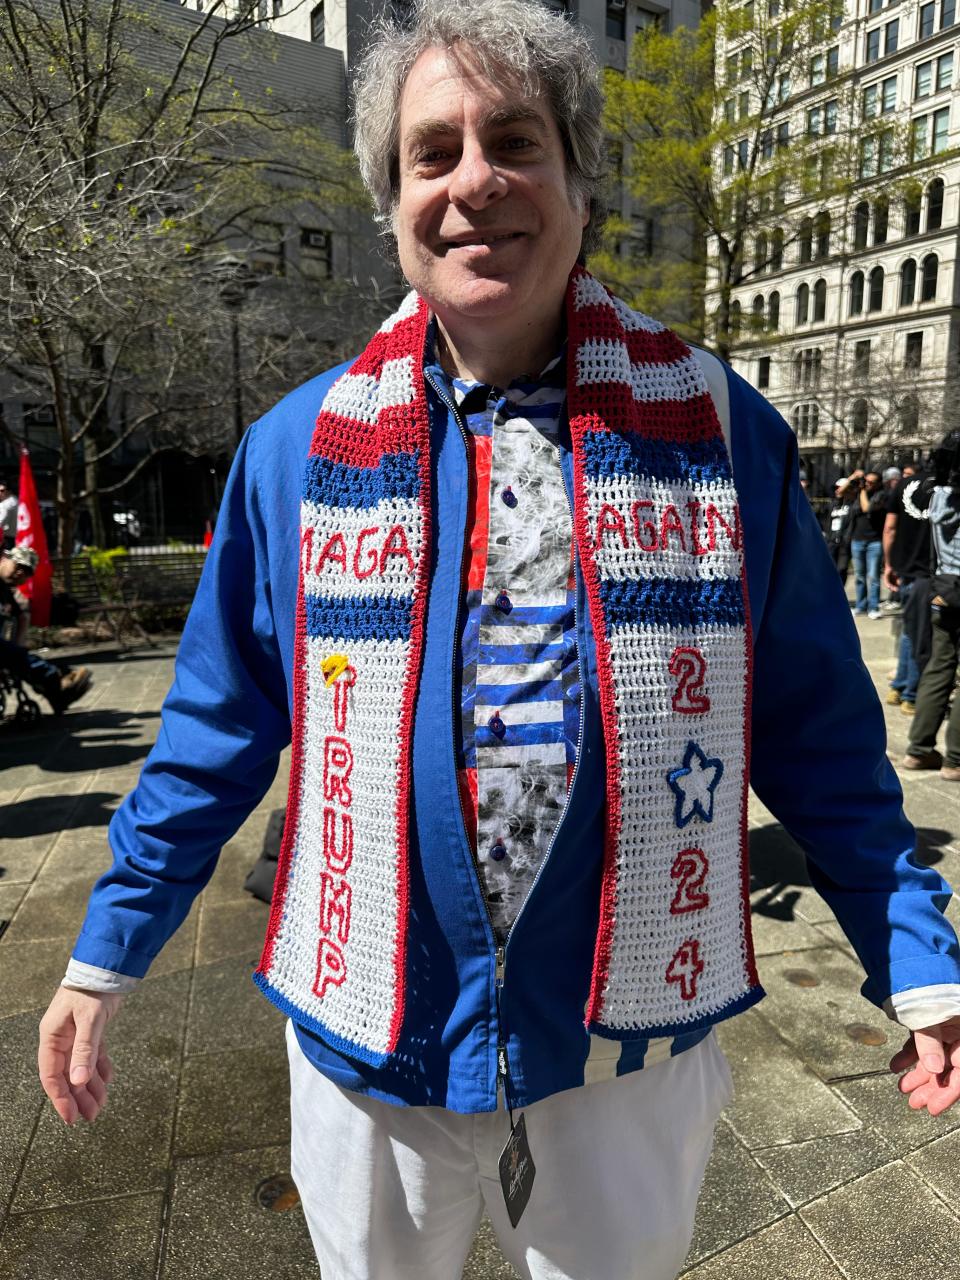 Steve Merczynski, of New York, shows off his scarf at a pro-Trump protest in New York City on April 15, 2024, the first day of the former president's hush money trial.